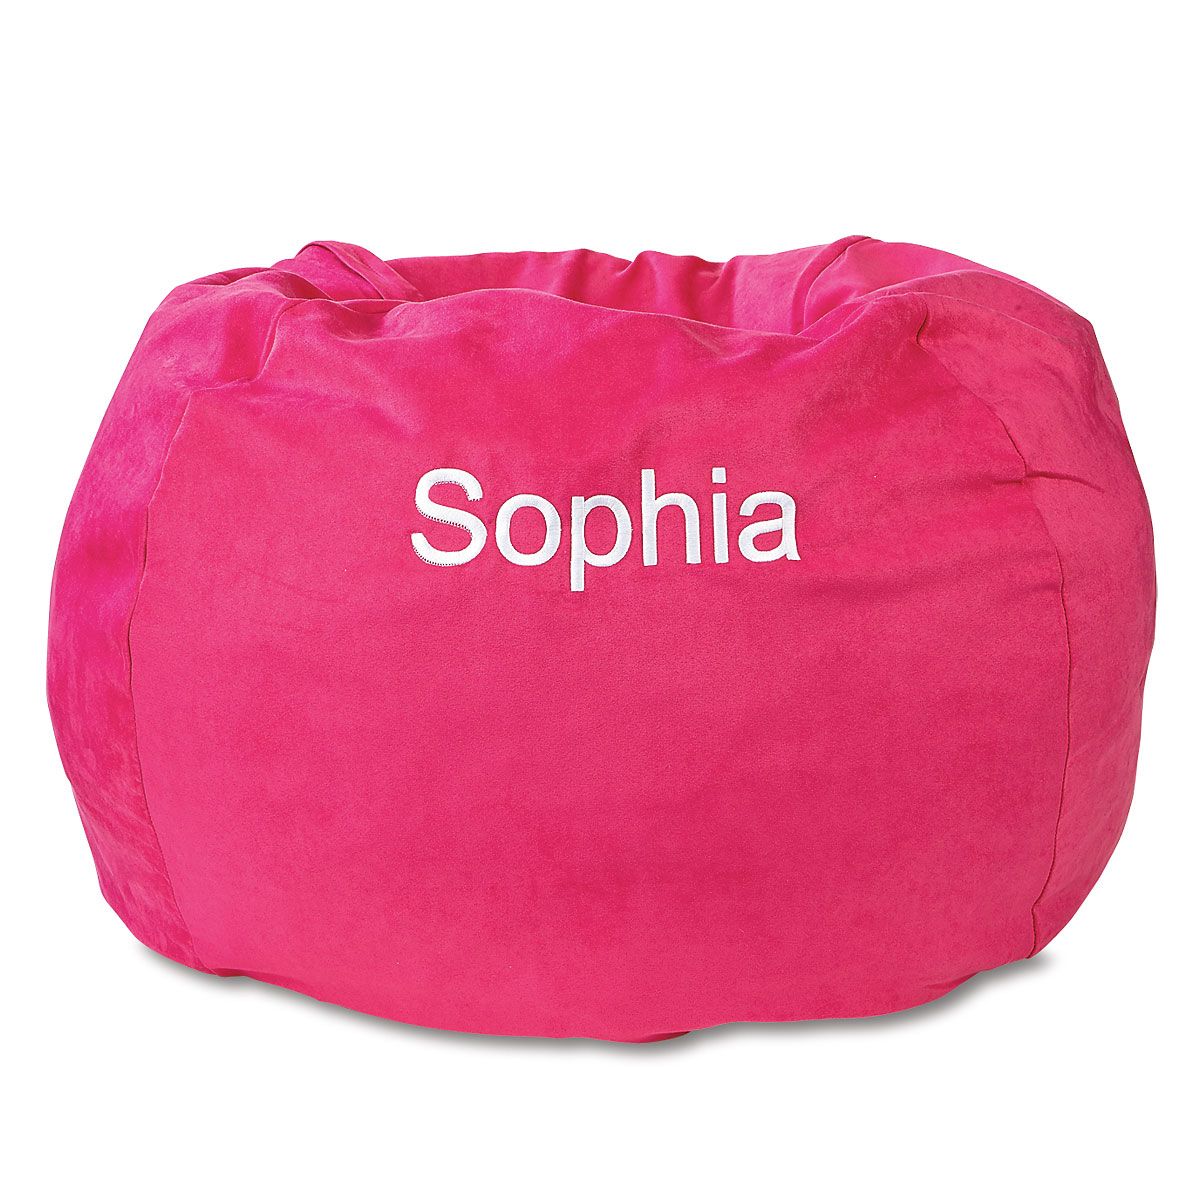 personalized bean bag chairs for adults